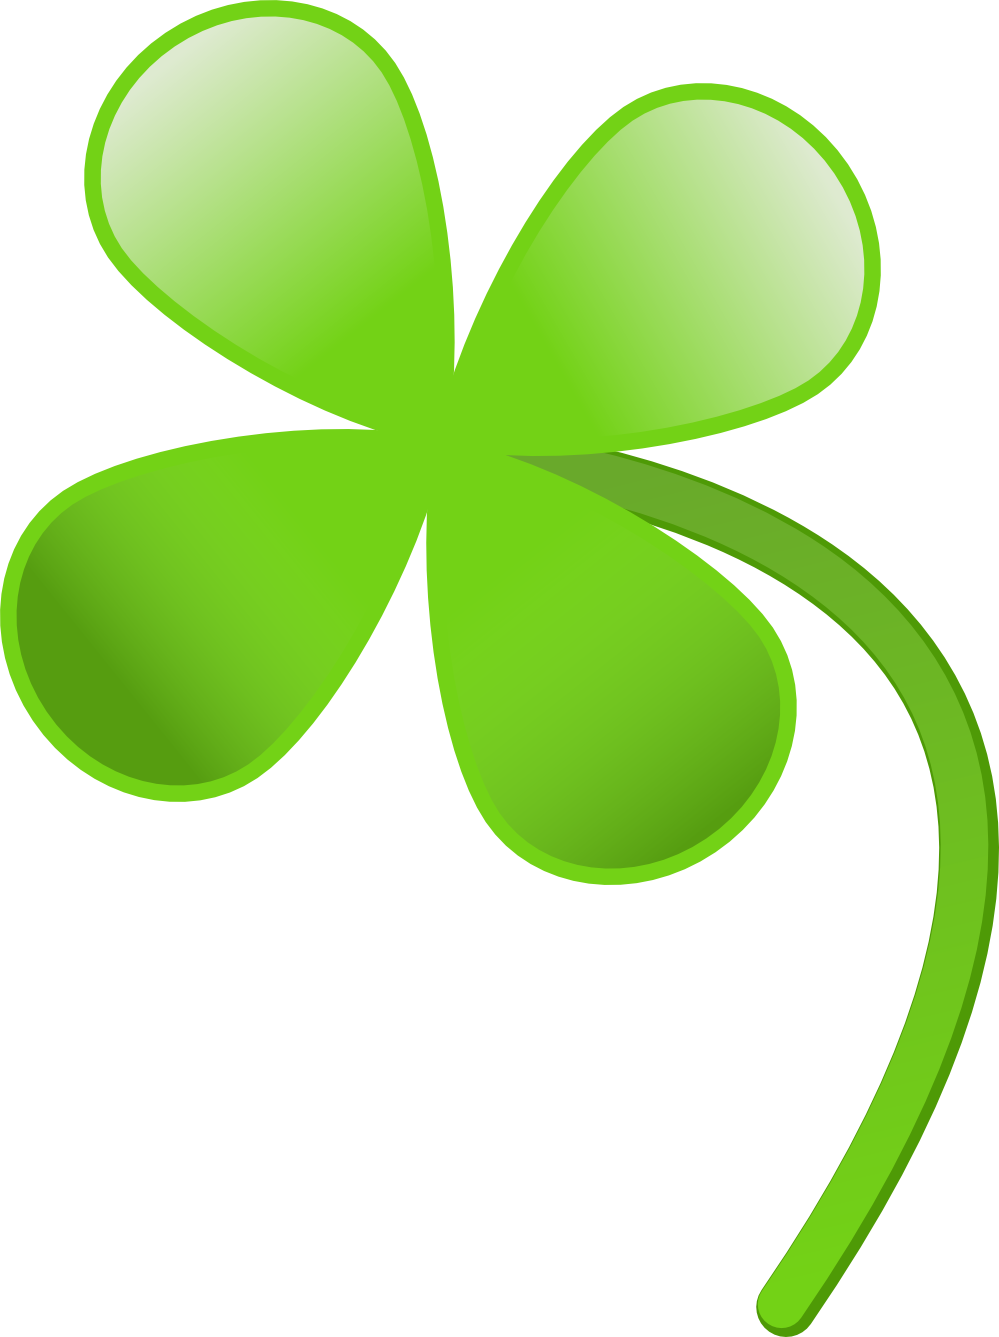 Download PNG image - Clover PNG Free Download 